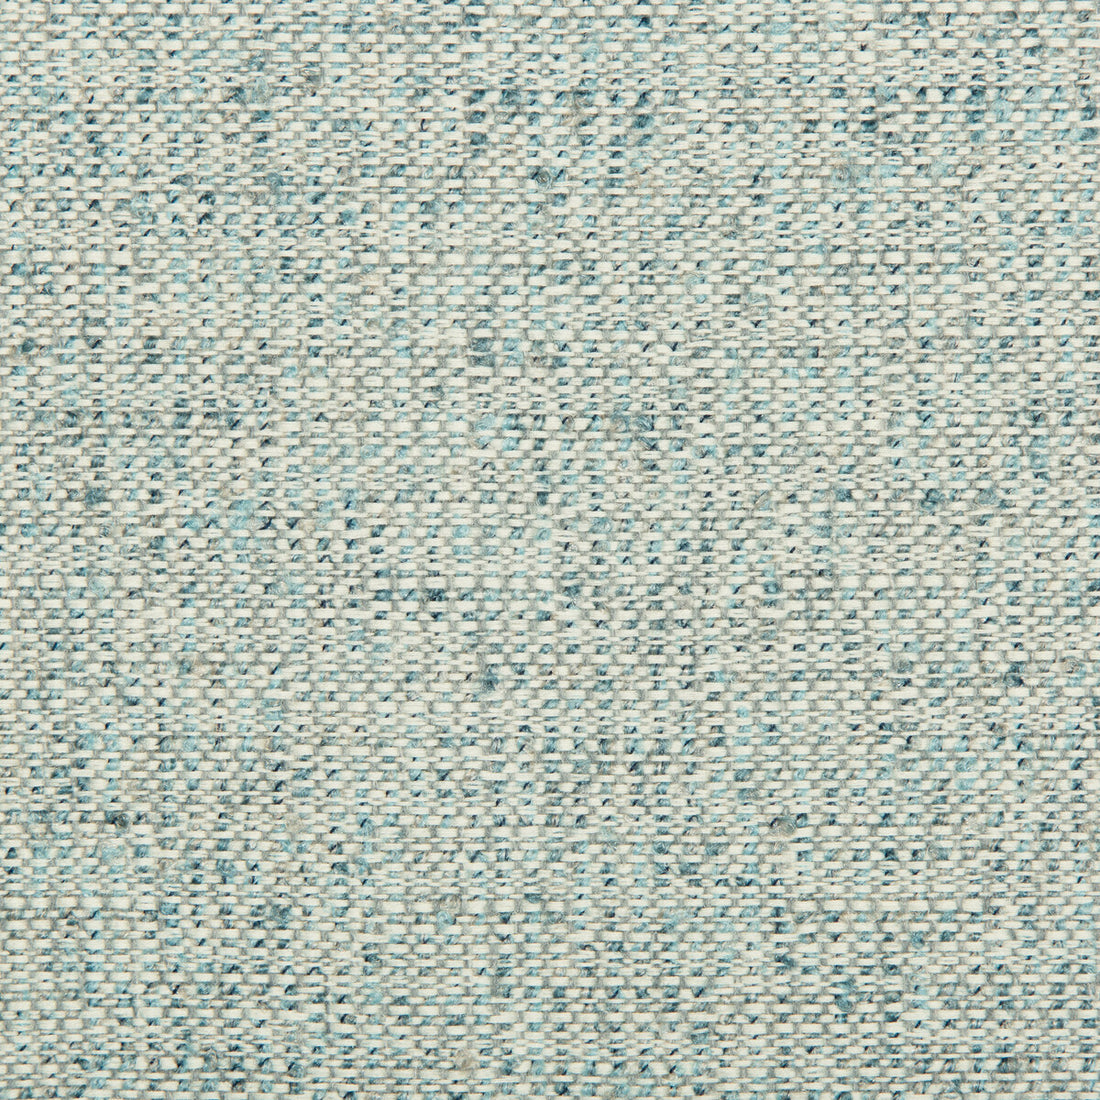 Kravet Smart fabric in 34616-1615 color - pattern 34616.1615.0 - by Kravet Smart in the Performance Crypton Home collection